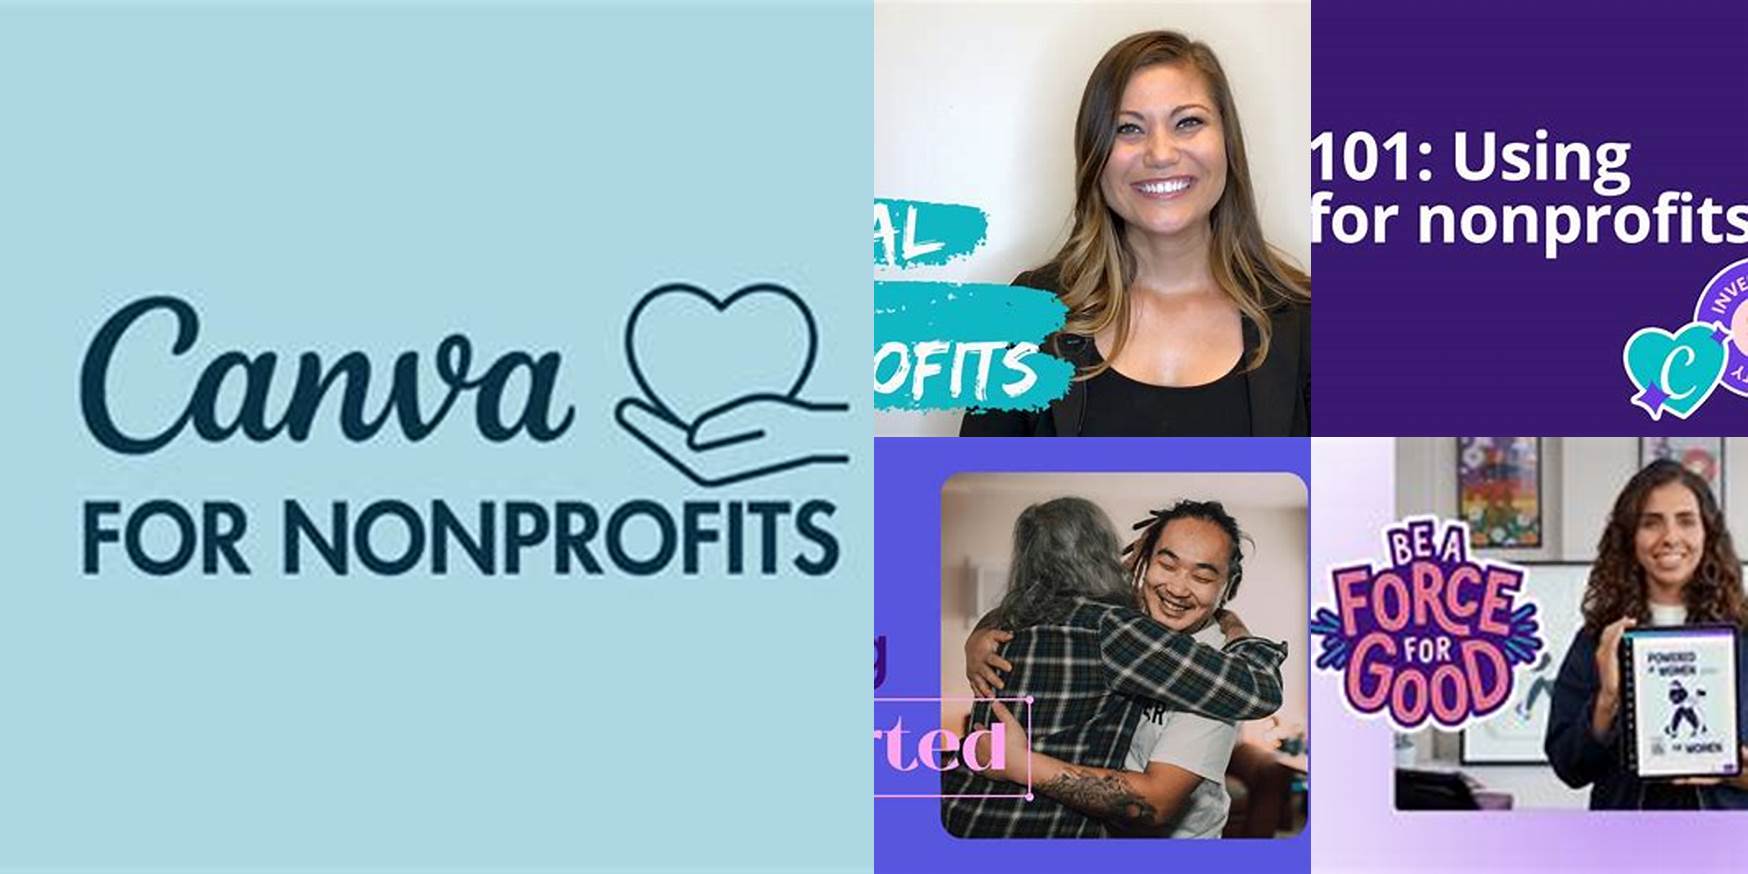 Is Canva Free For Nonprofits